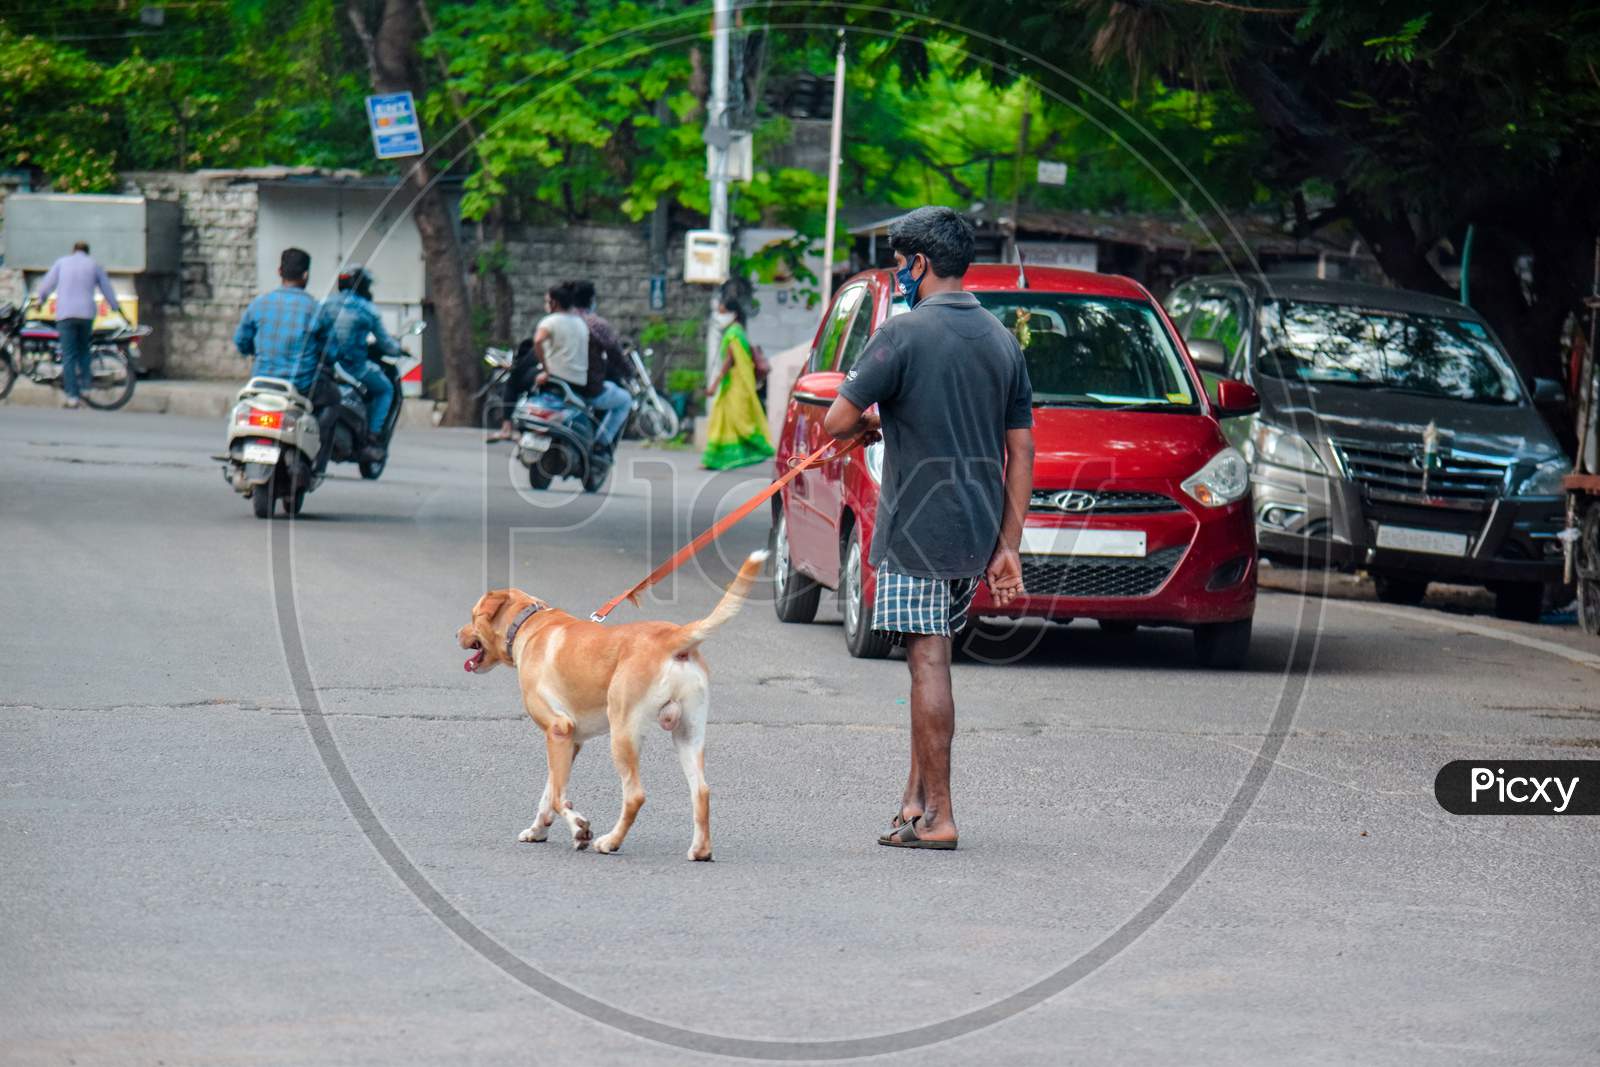 Hyderabad, Telangana, India. july-14-2020: man is walking on the road with his pet dog. man with protective safety mask on his face